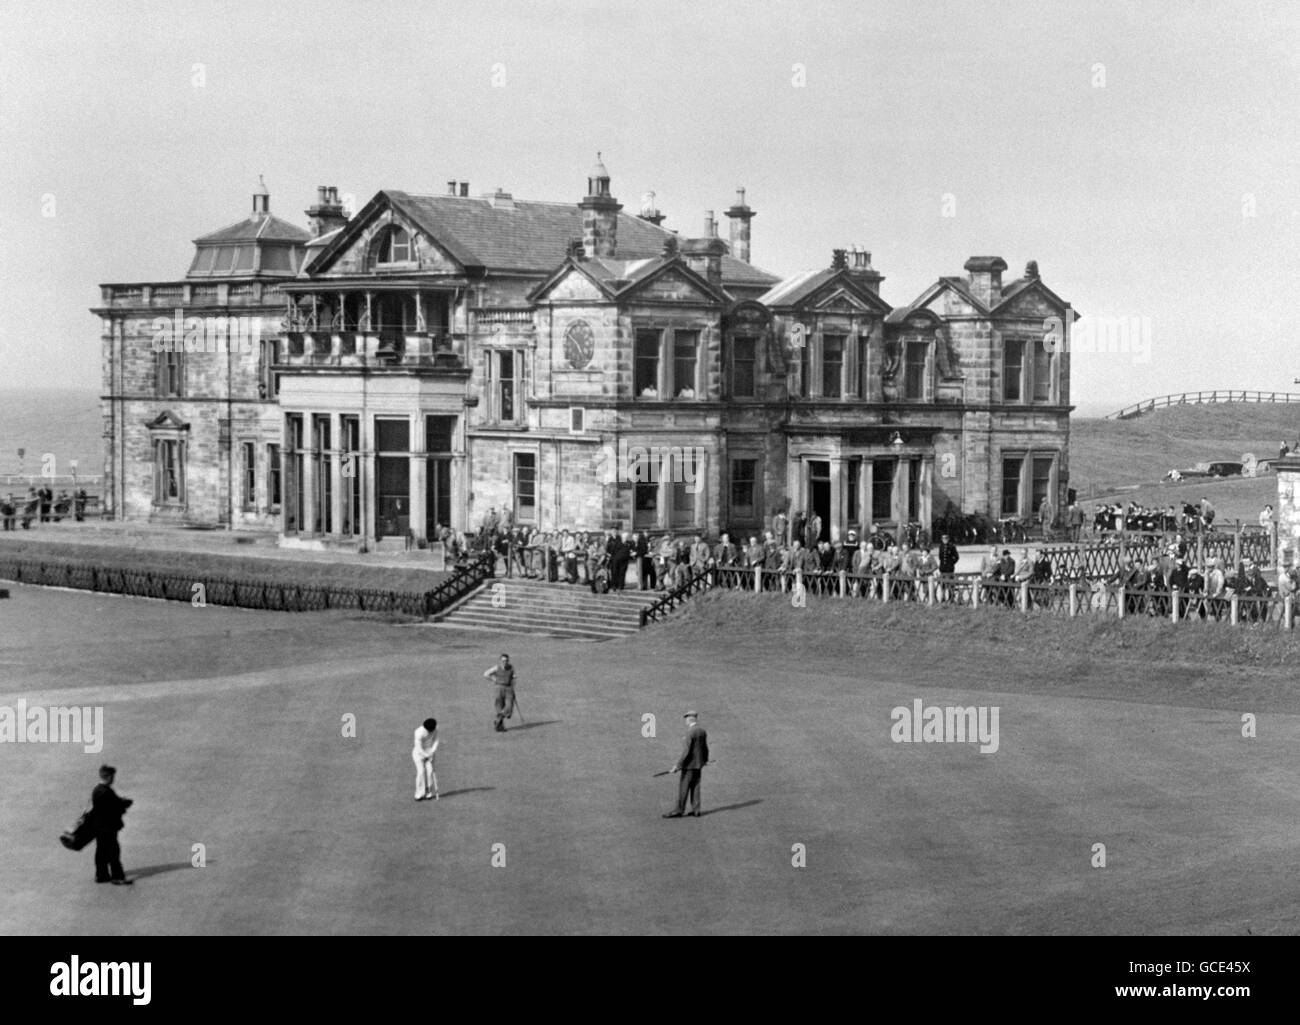 Das Clubhaus des Royal and Ancient Golf Club of St Andrews. Stockfoto